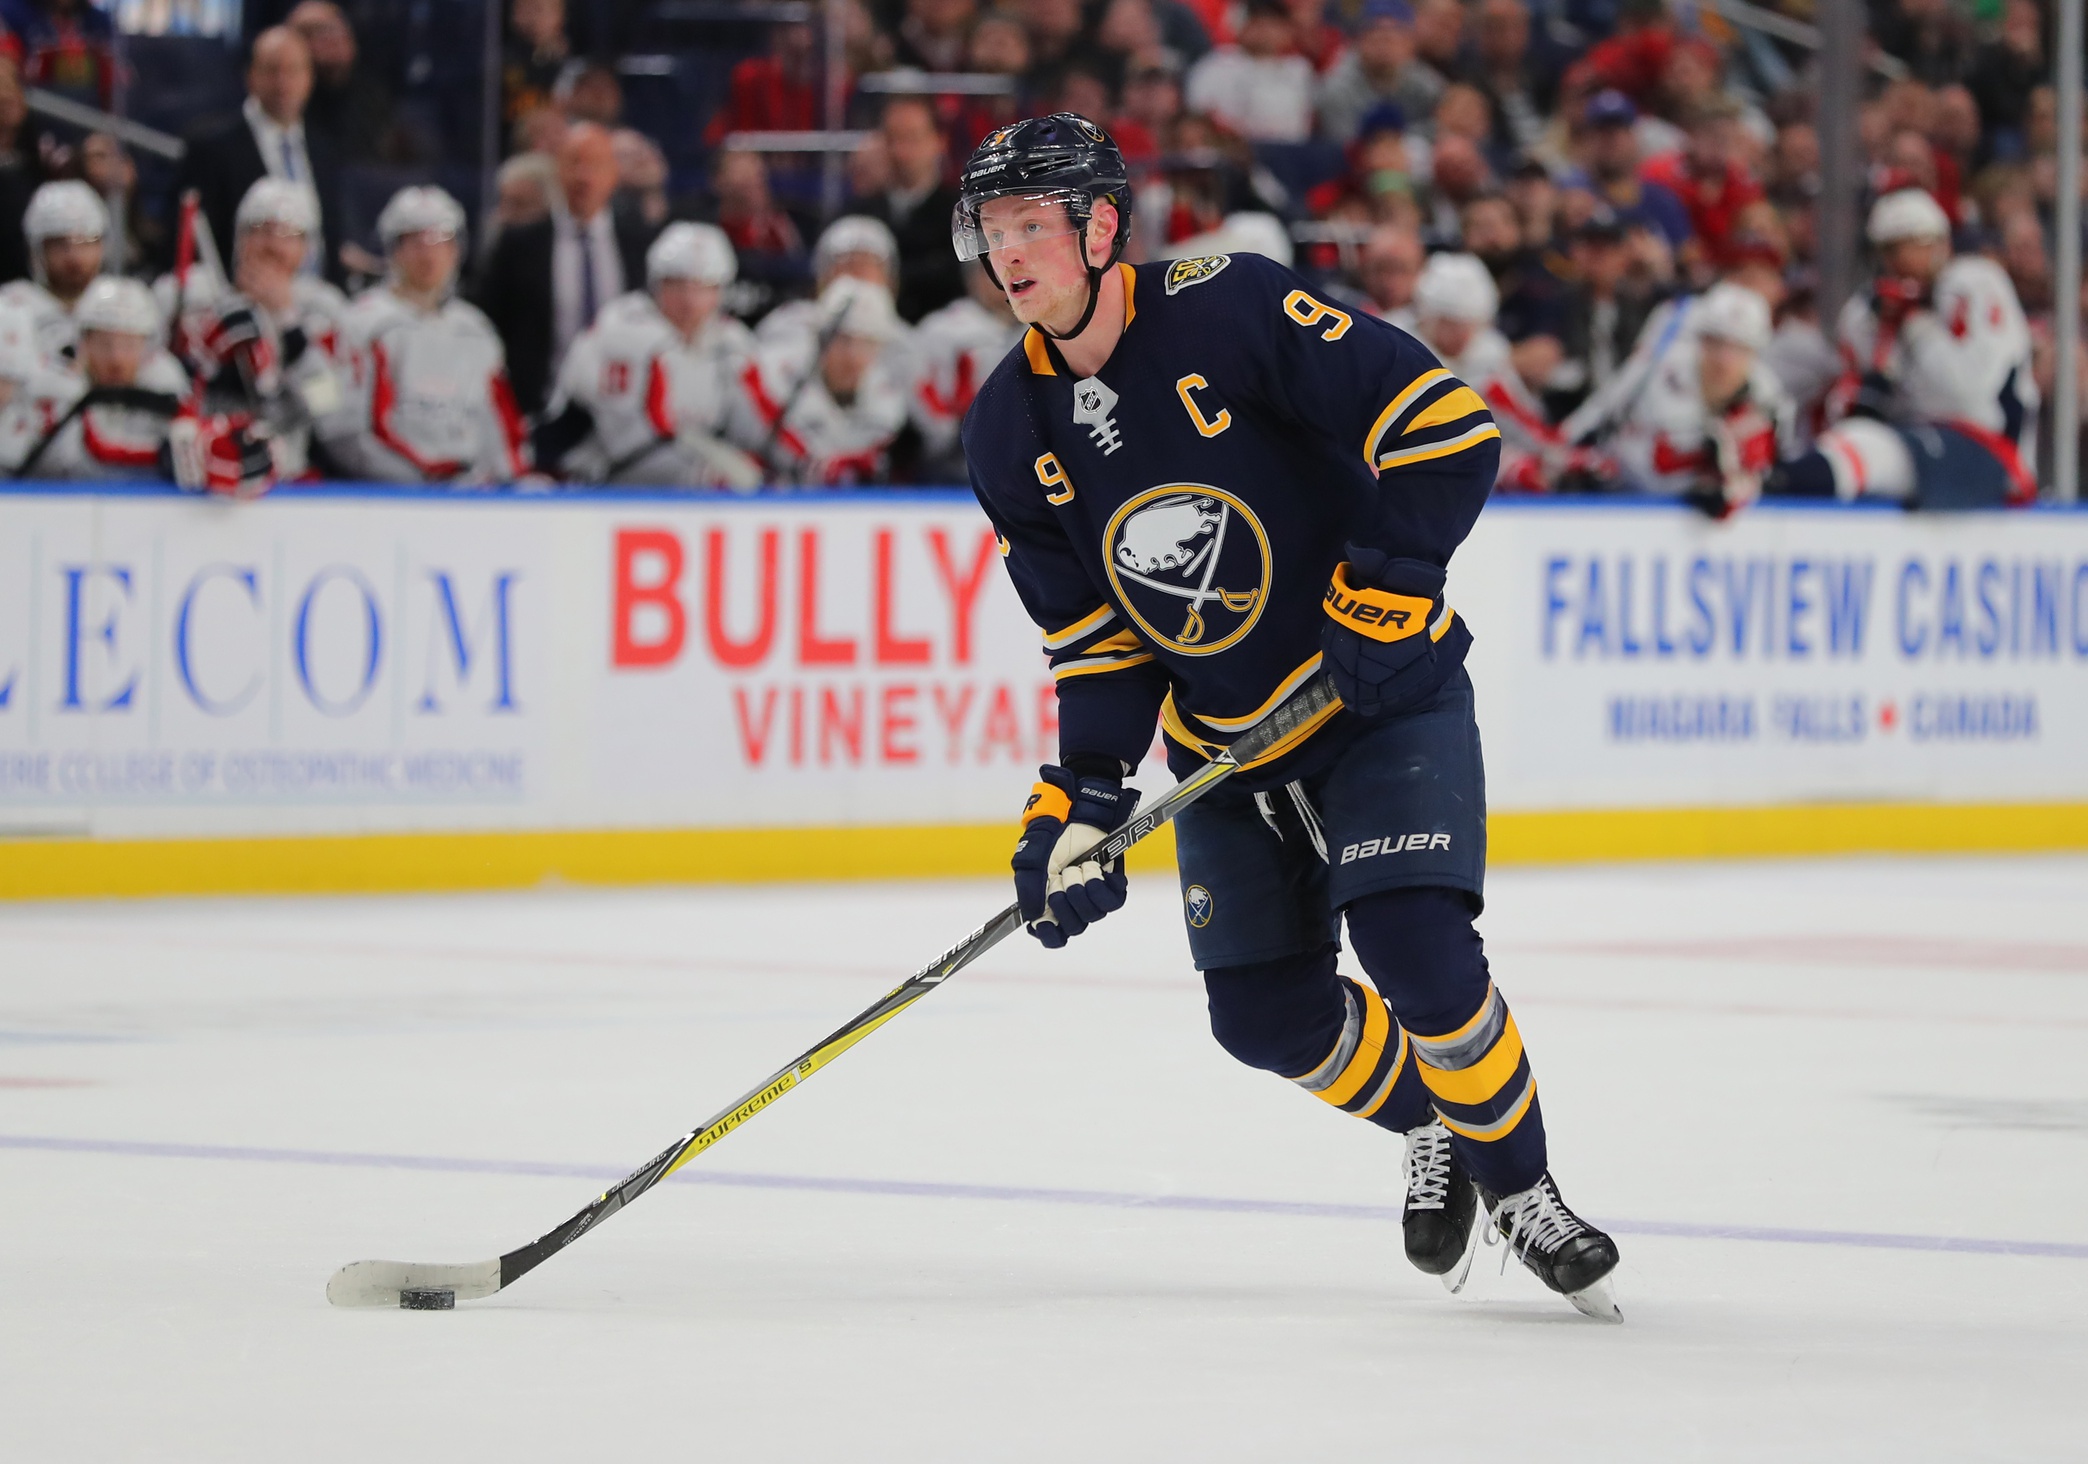 20 Fantasy Thoughts: What to do with Tuch, Krebs after Eichel trade